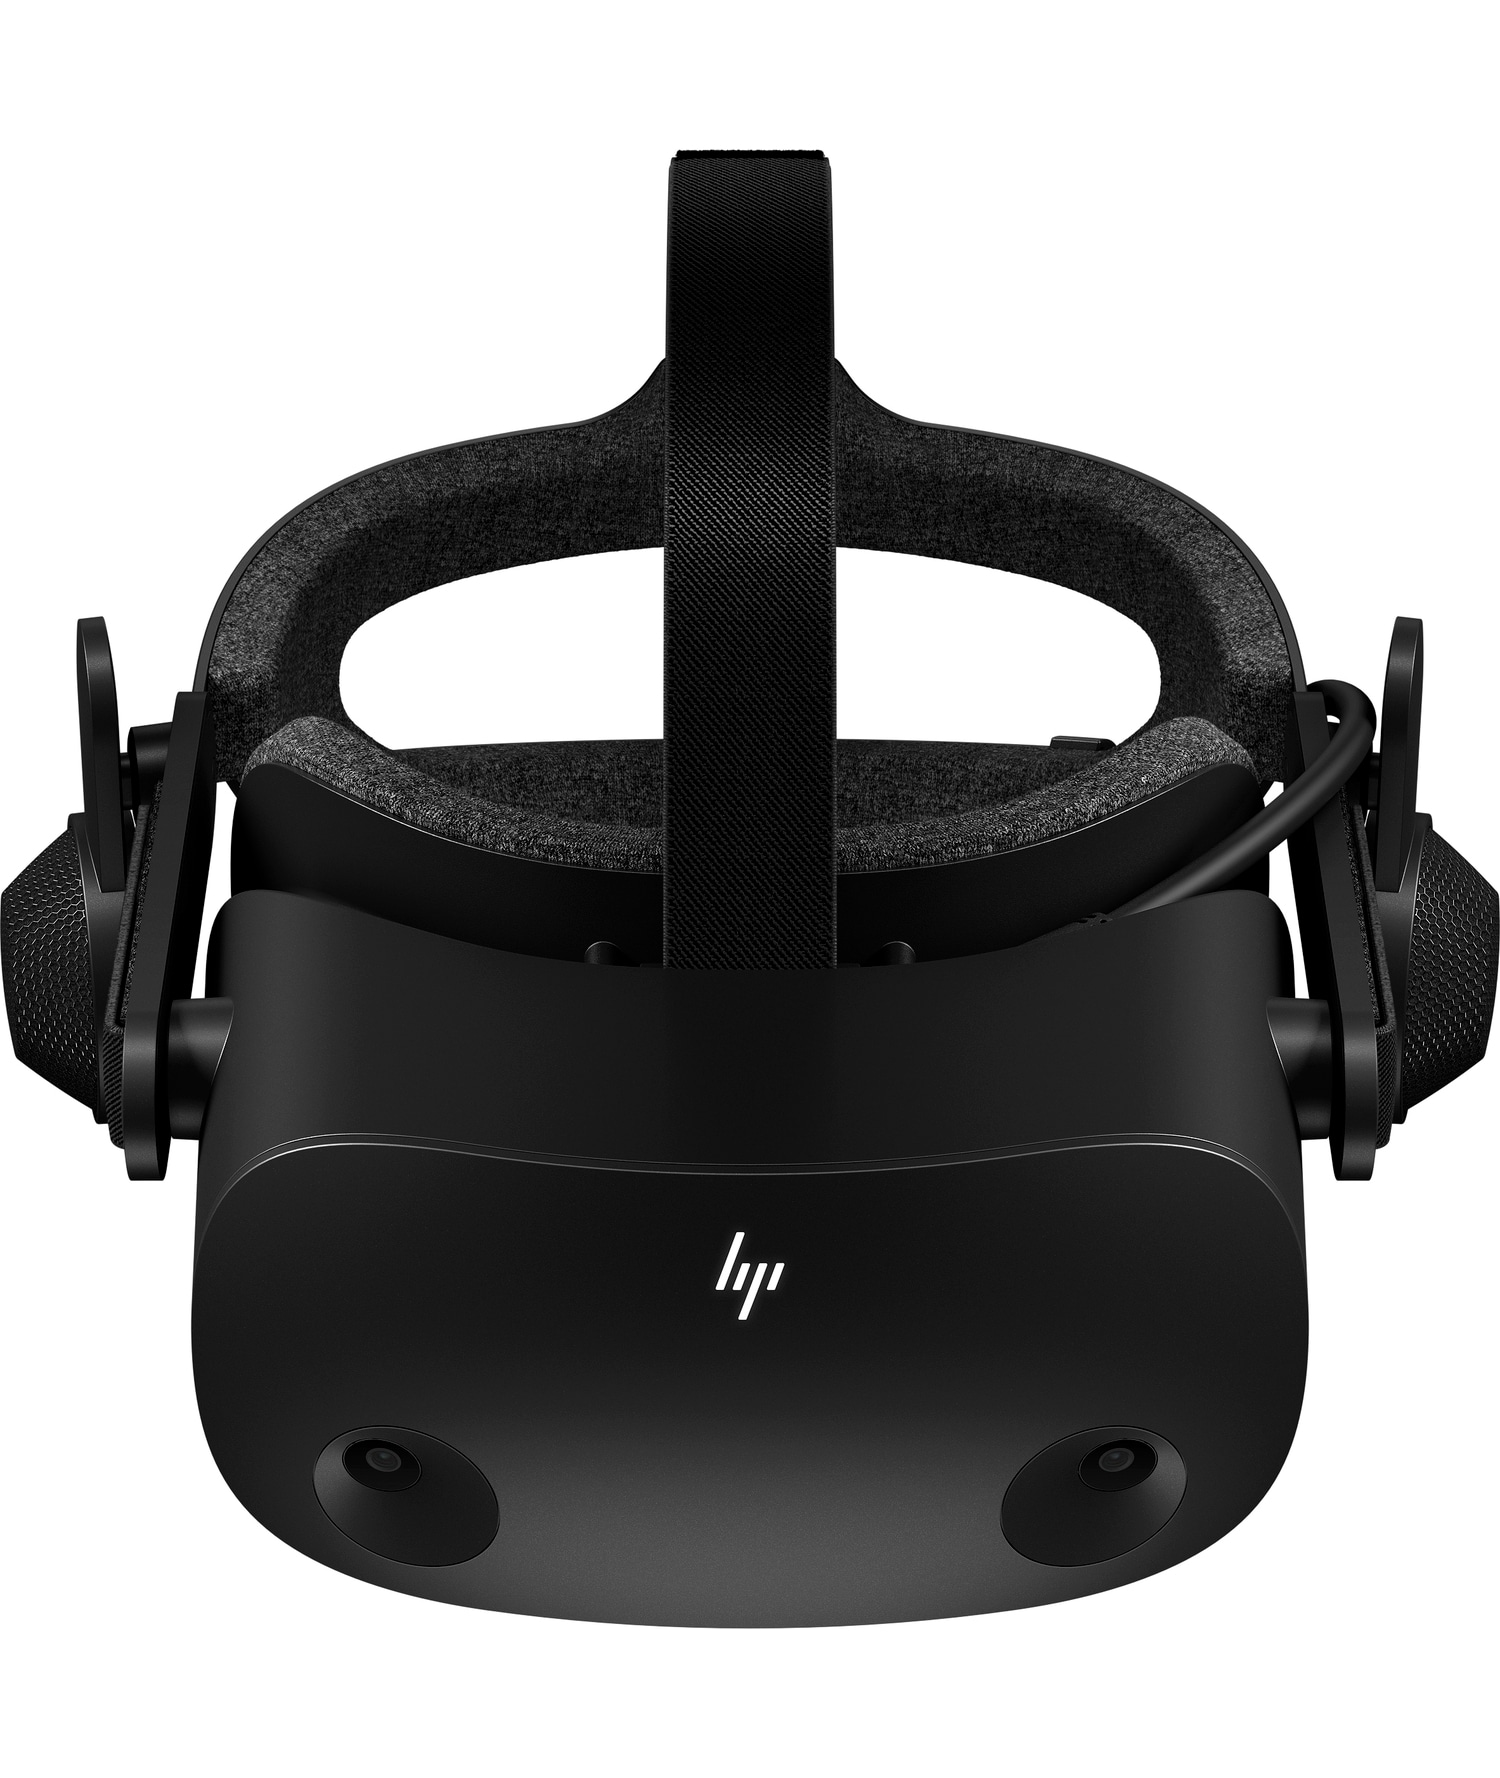 HP Reverb G2 Virtual Reality Headset - image 1 of 7